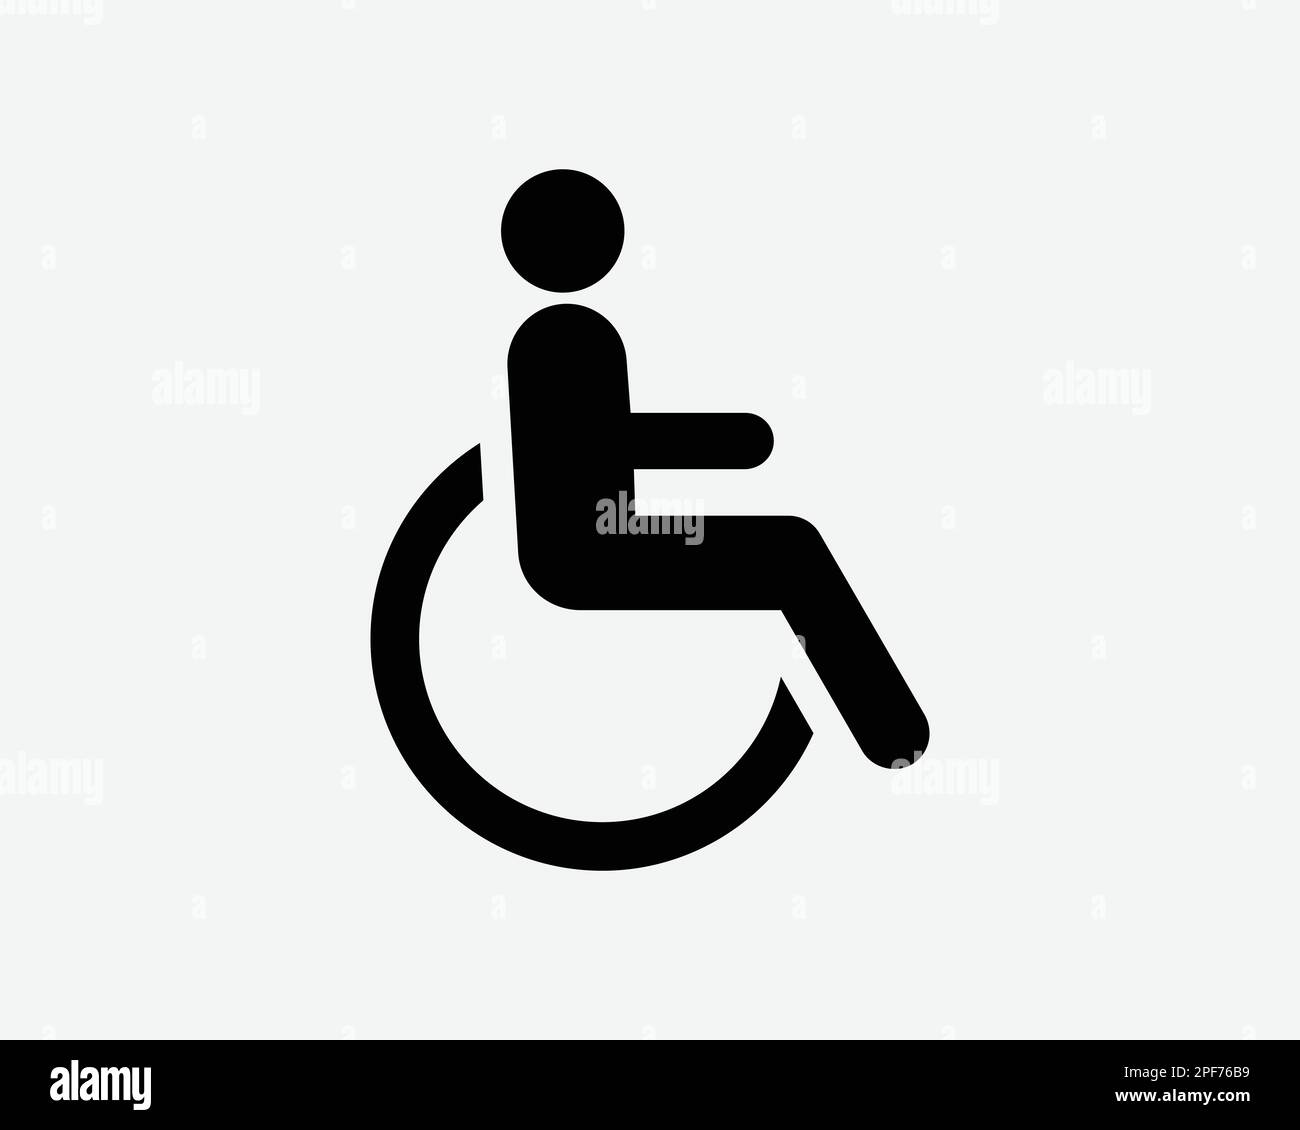 Diabled Person Icon Handicap Differently Abled People Wheelchair Black White Silhouette Sign Symbol Graphic Clipart Artwork Illustration Pictogram Vec Stock Vector